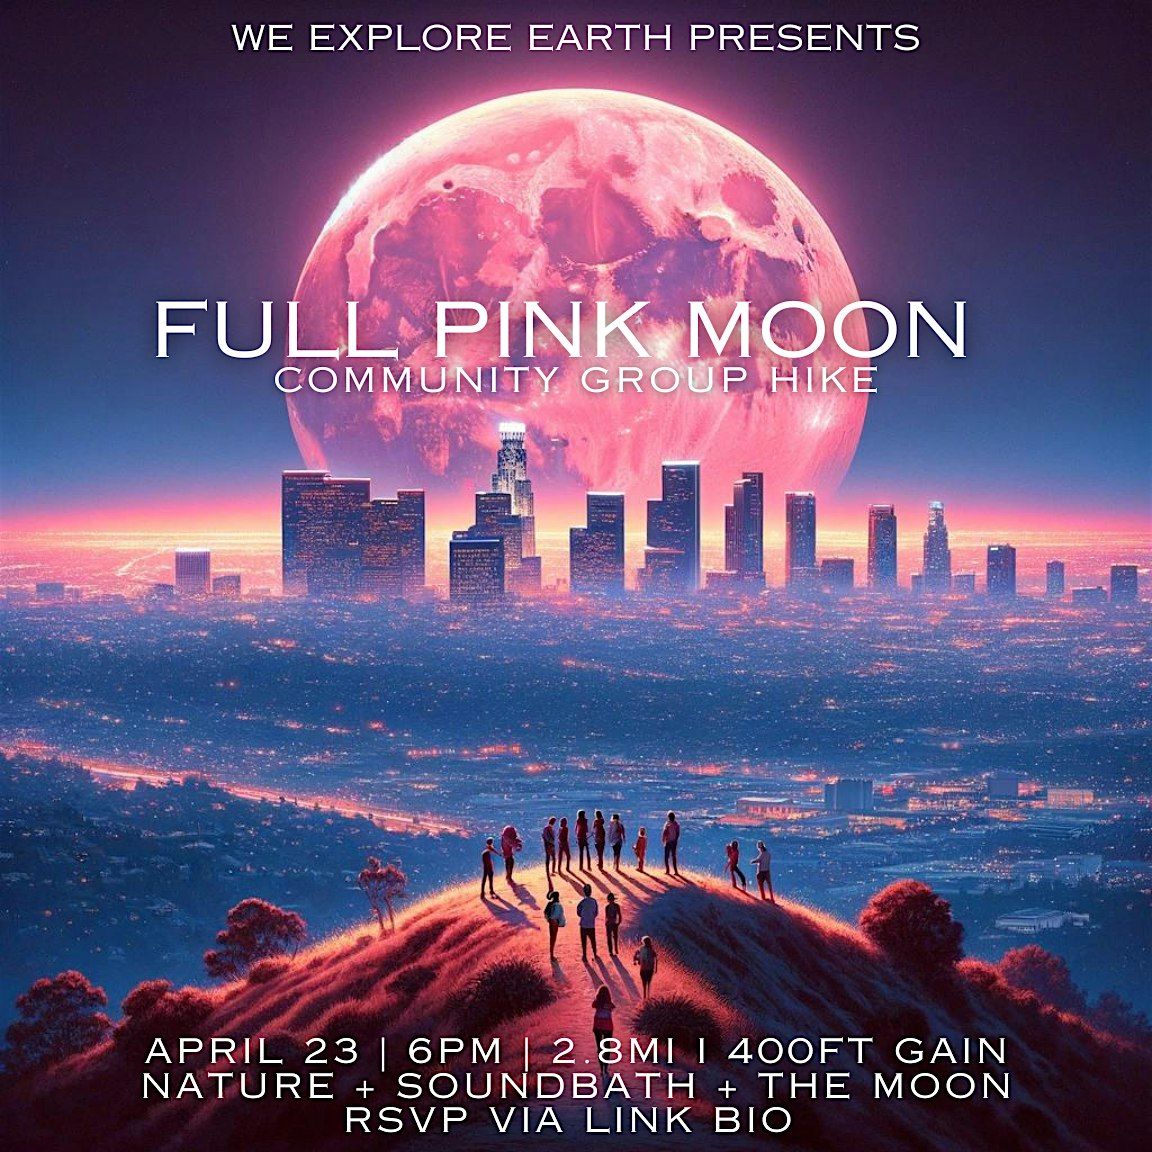 Full Pink Moon Group Hike Experience